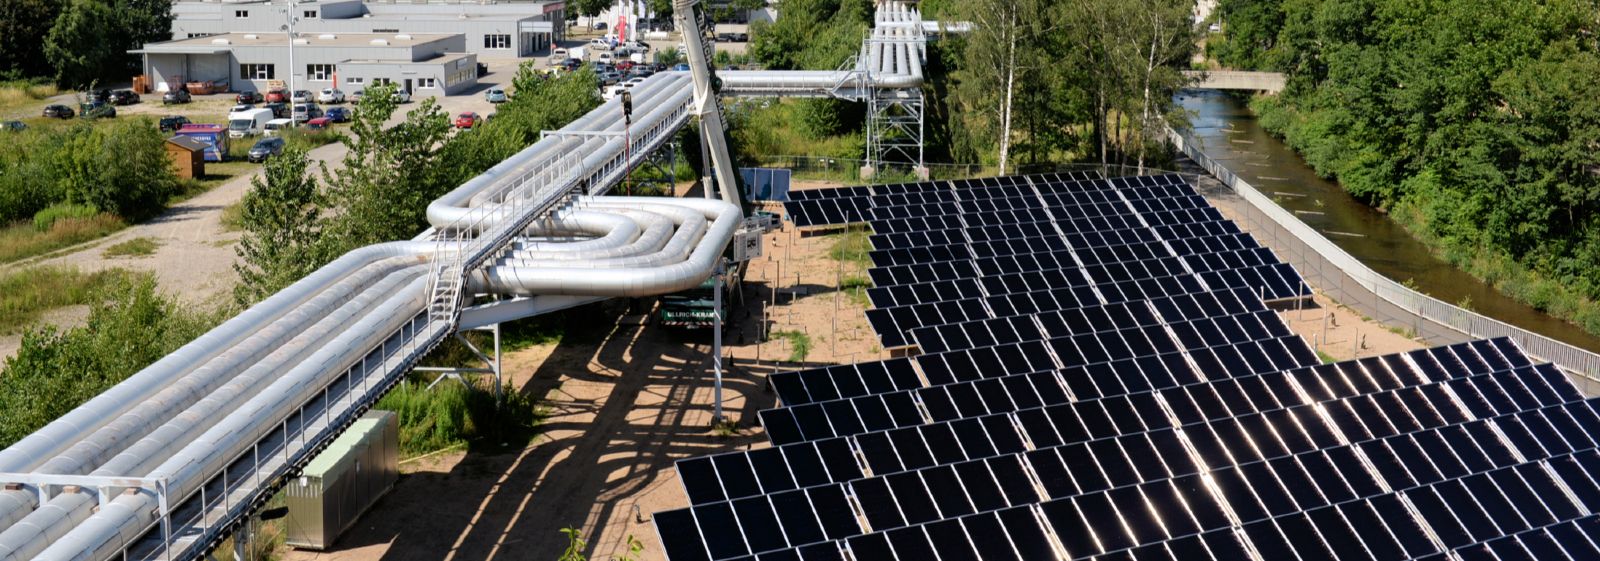 District heating pipeline (left) and Solar thermal field (right)